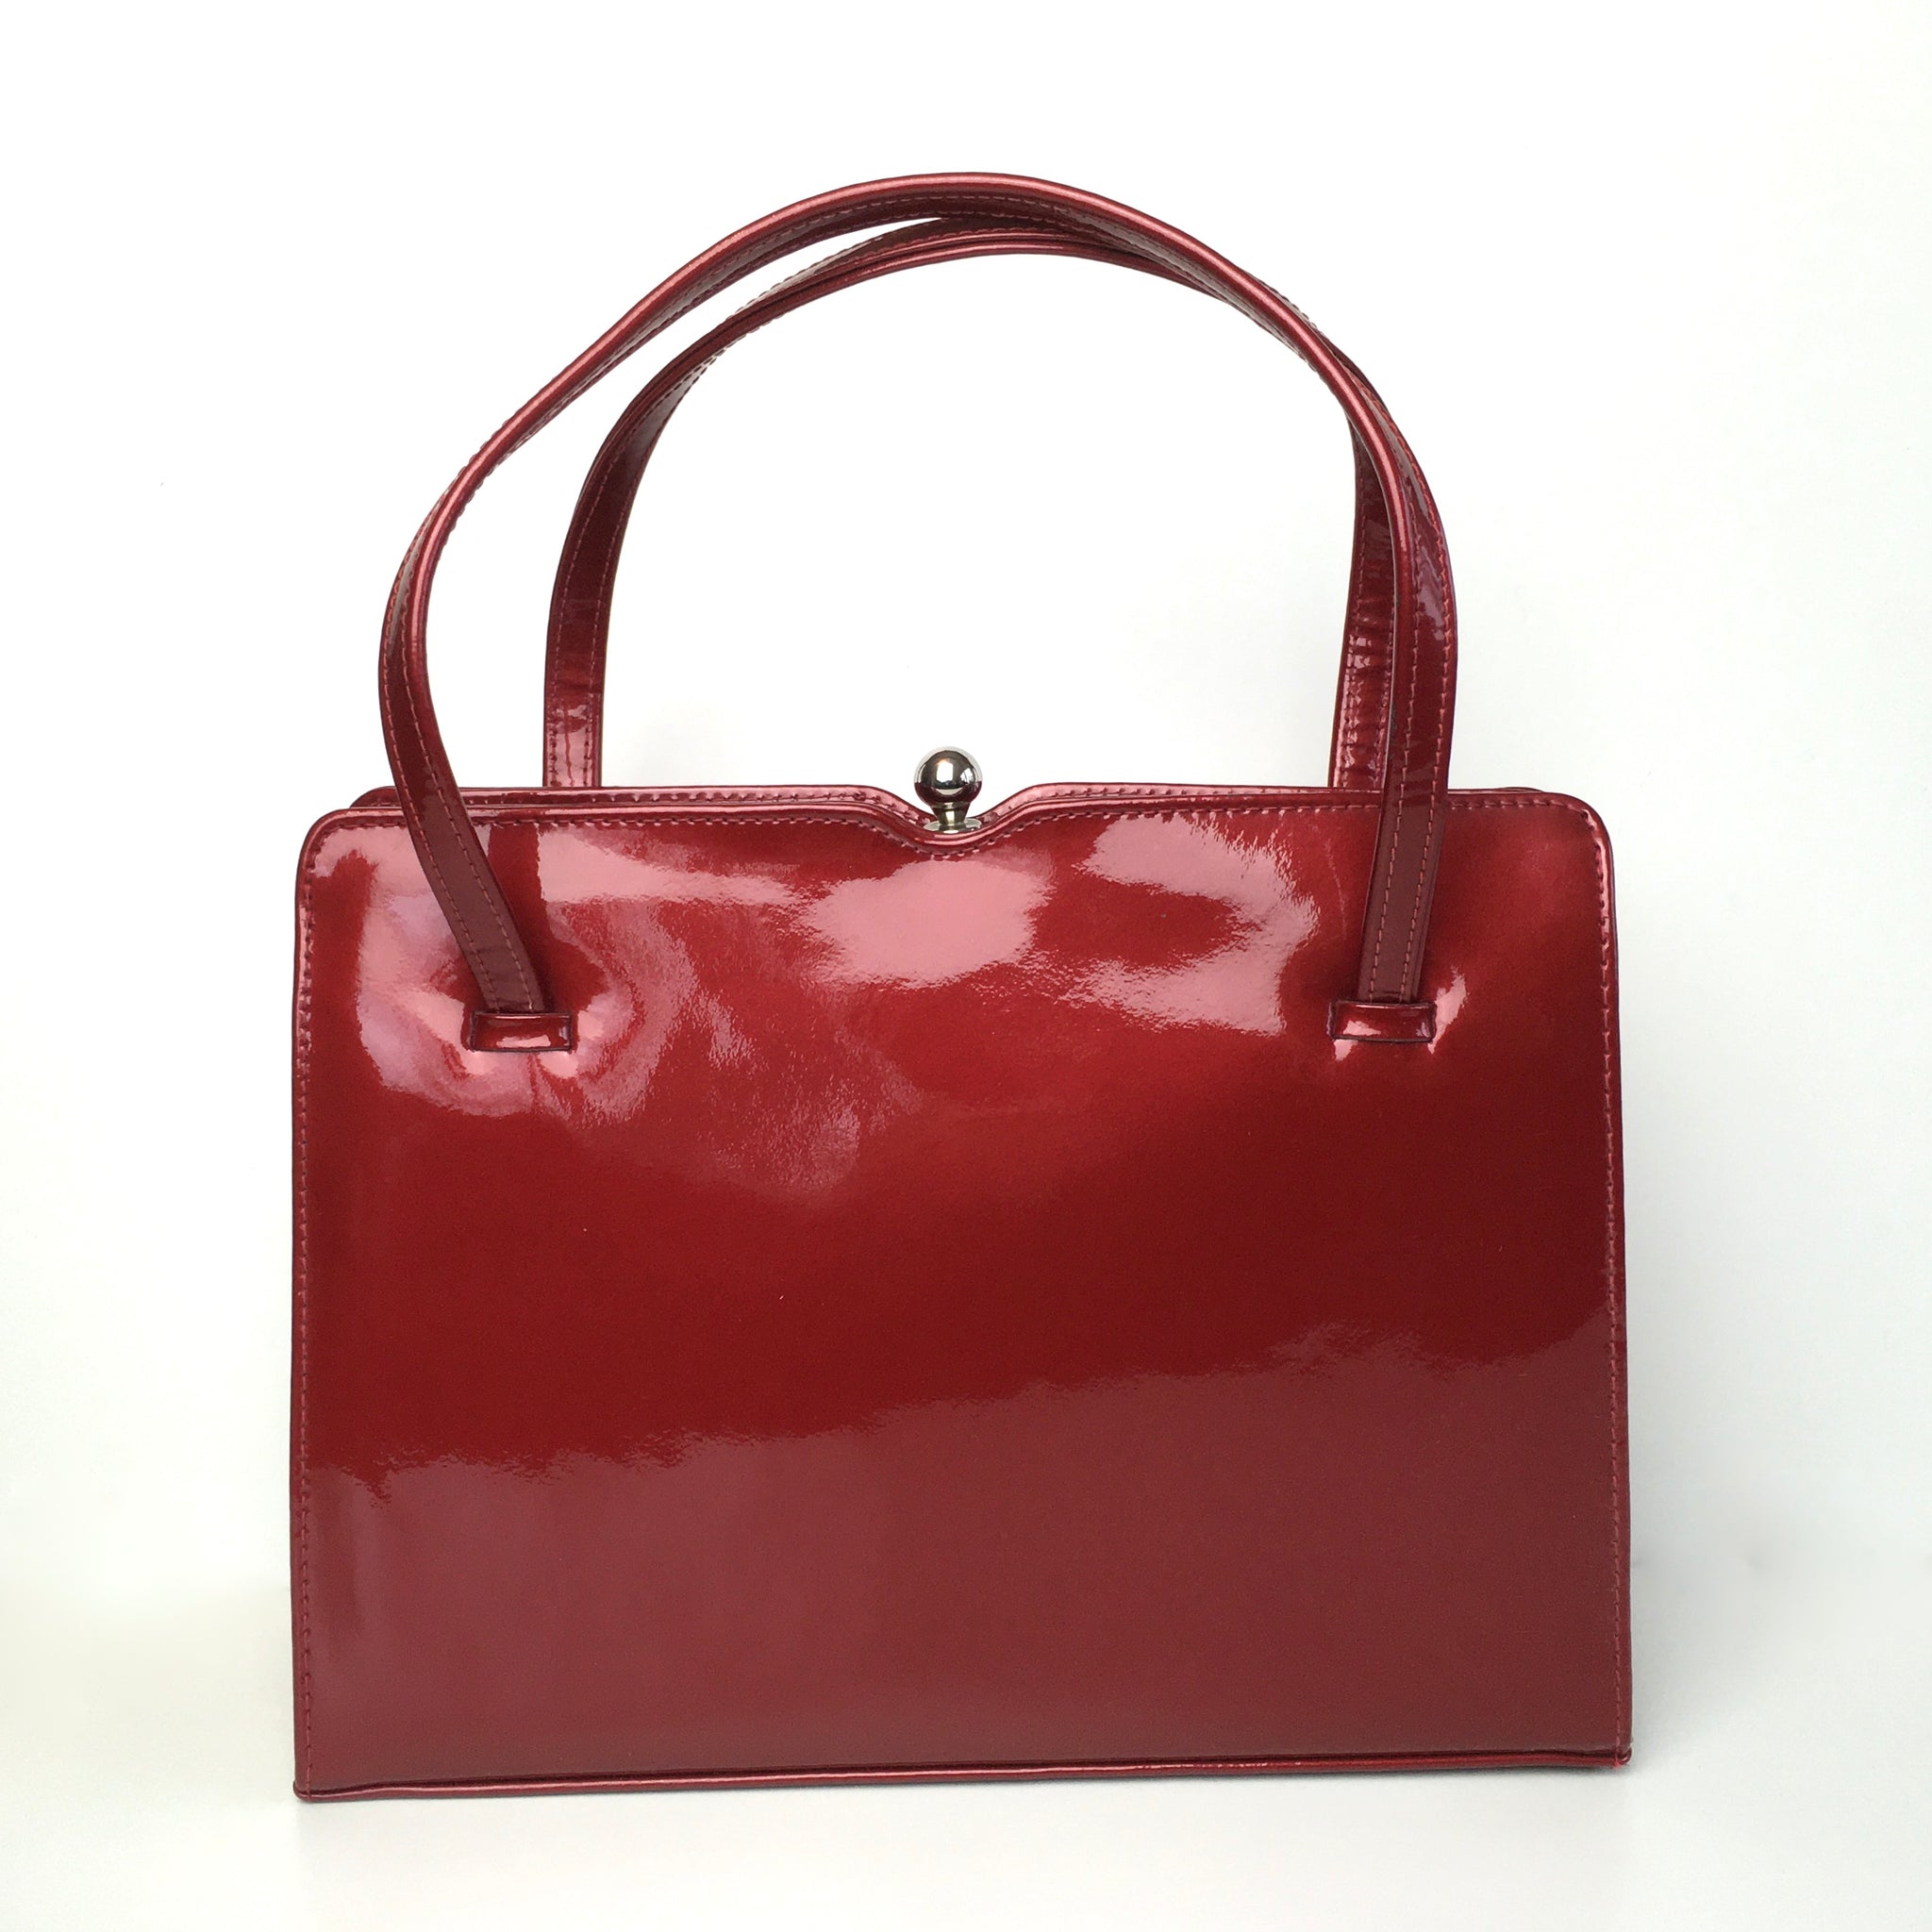 Vintage 50s Candy Apple Red Patent Leather Kelly Handbag